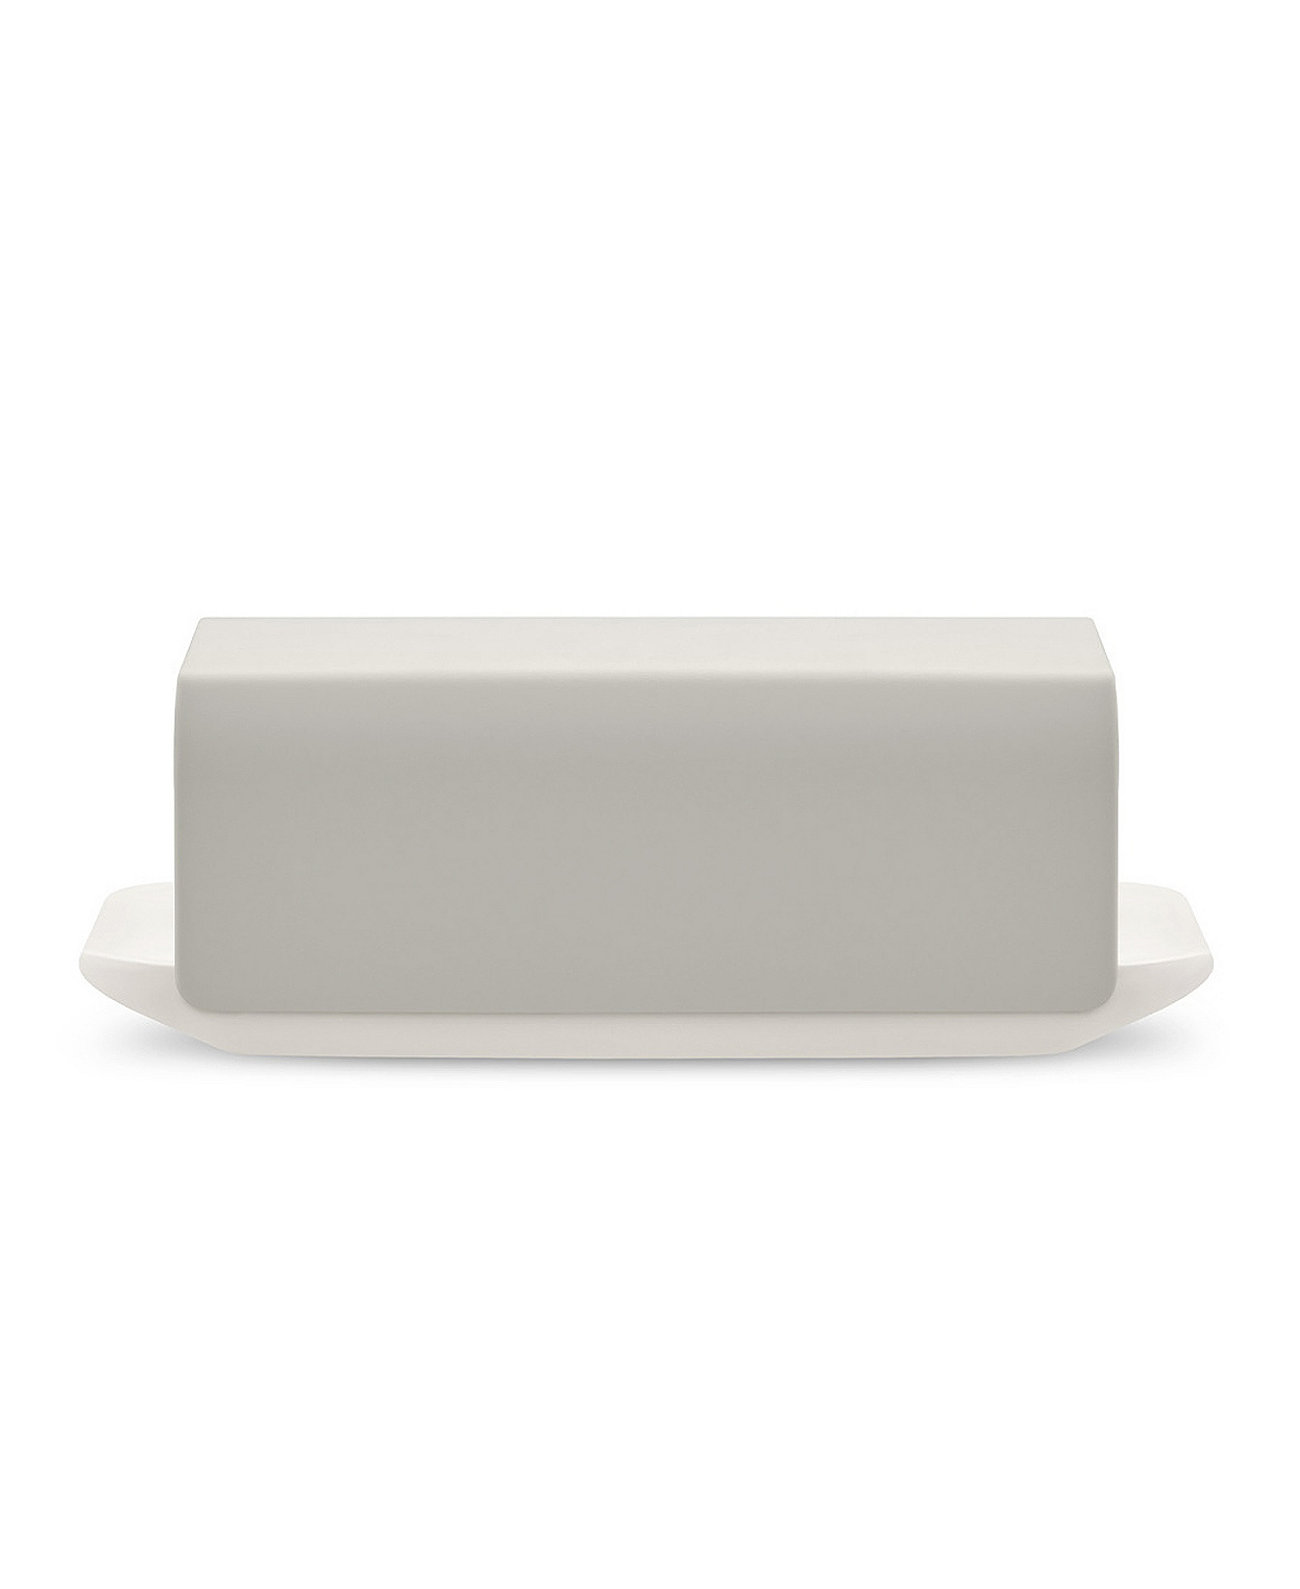 Butter Dish by BIGGAME Alessi